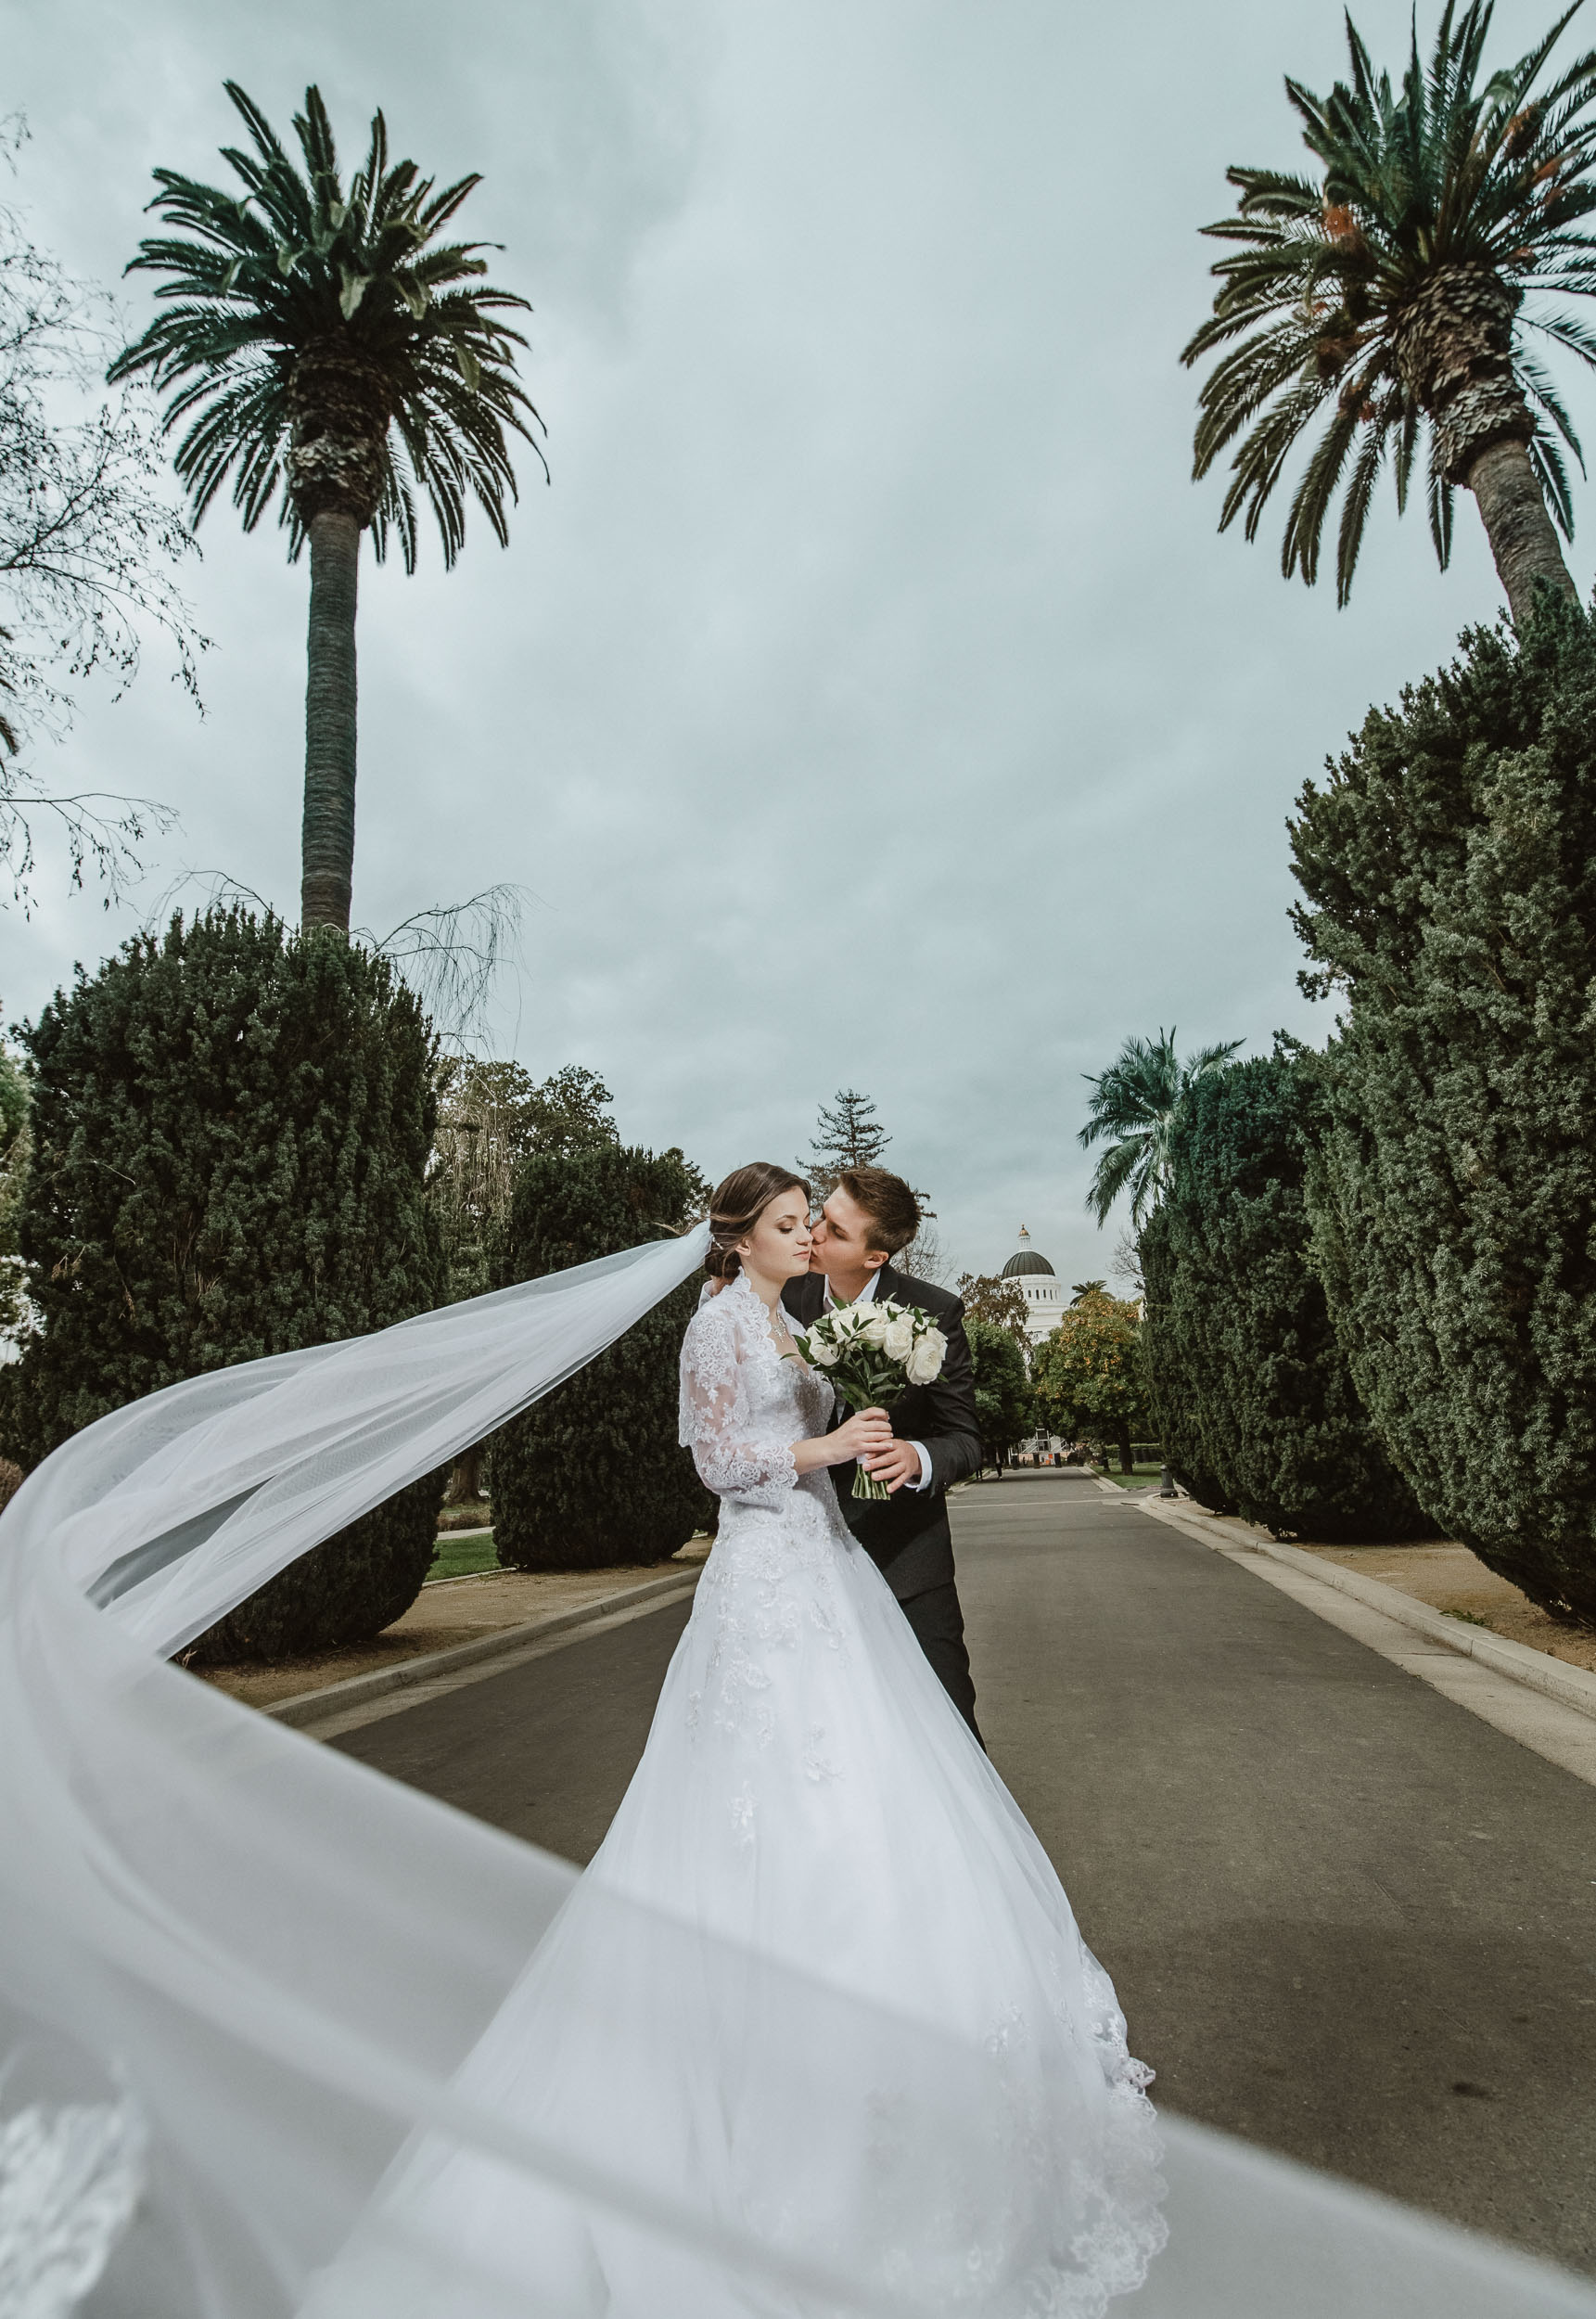 A bride and groom kissing in front of palm trees.